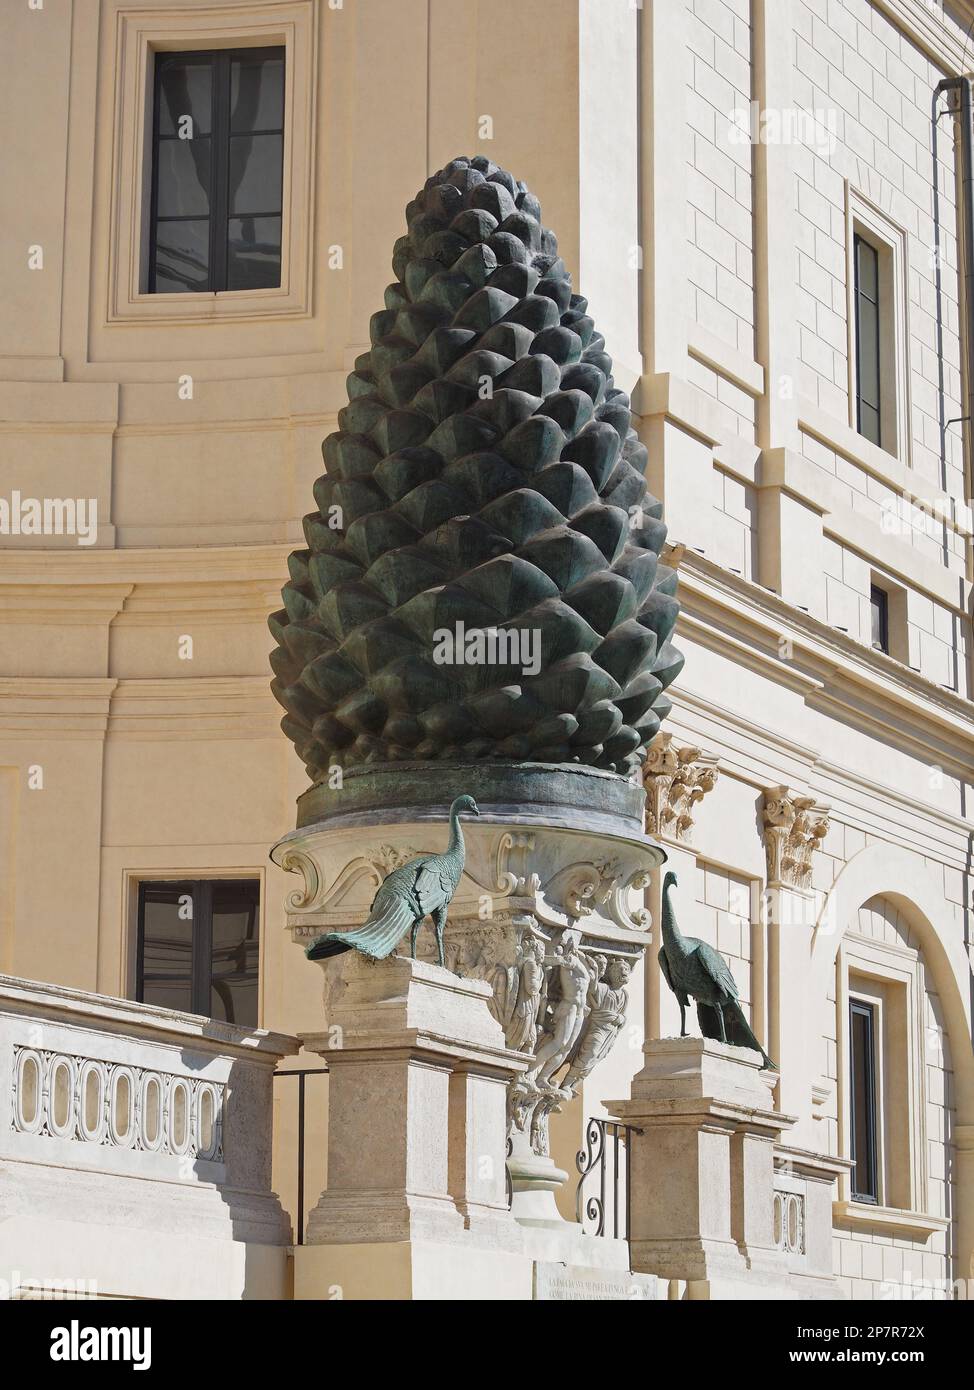 Fontana della Pigna is a 4m high Roman bronze pinecone that once spouted water from the top. It now occupies a vast niche in a wall of the Vatican. Stock Photo